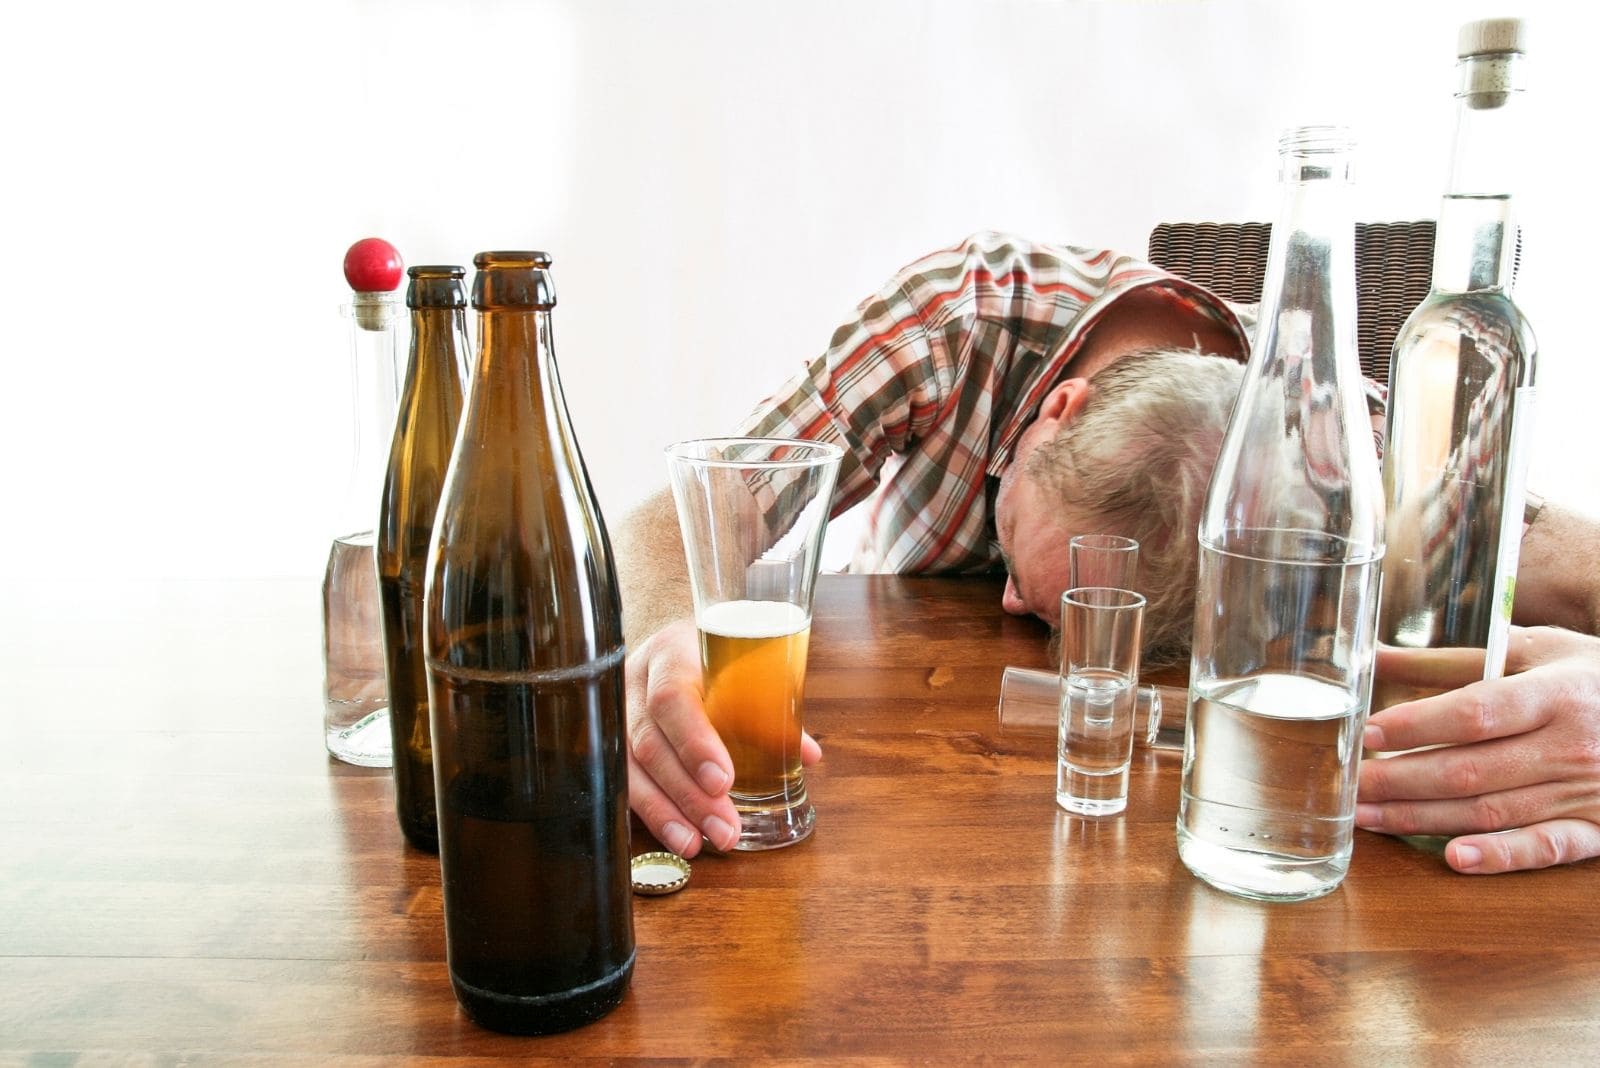 drunk man sleeping on the table with different alcoholic bottles and a glass